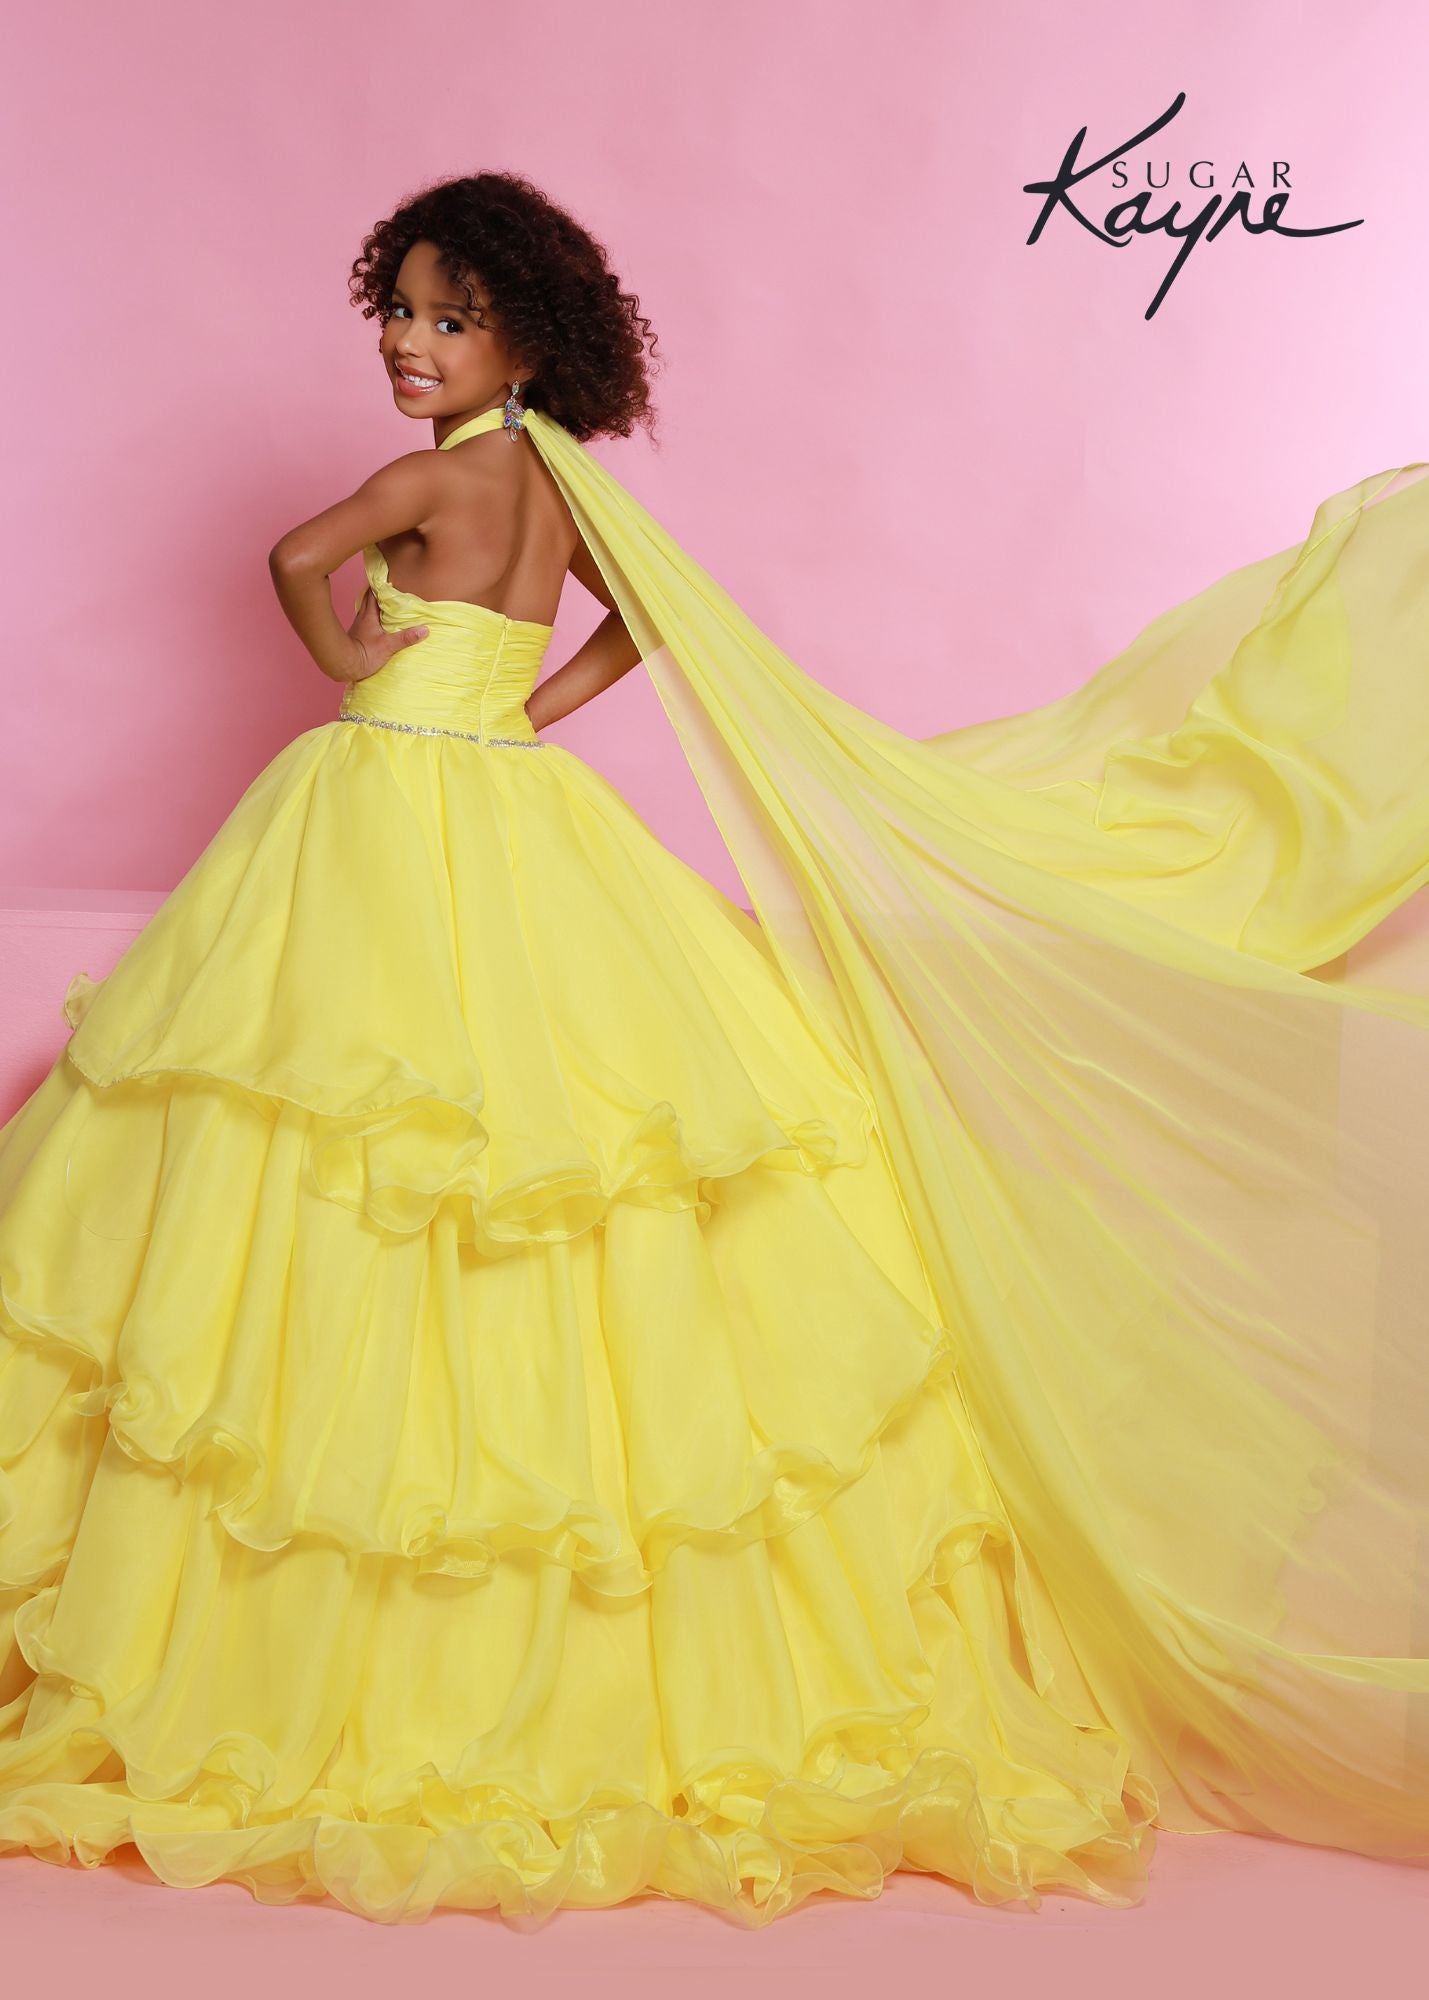 Sugar Kayne C305 Layer Girls Ruffle Pageant Ball Gown Cape Halter Formal Dress Oh s'cute!! This poly chiffon layered ballgown features a crisscross halter neckline with beaded trim along the waist. The train will float seamlessly across the stage, especially with the detachable cape.  Colors: Baby Blue, Lemon, White  Sizes: 2, 4, 6, 8, 10, 12, 14, 16  Fabric Poly Chiffon, Satin Lining